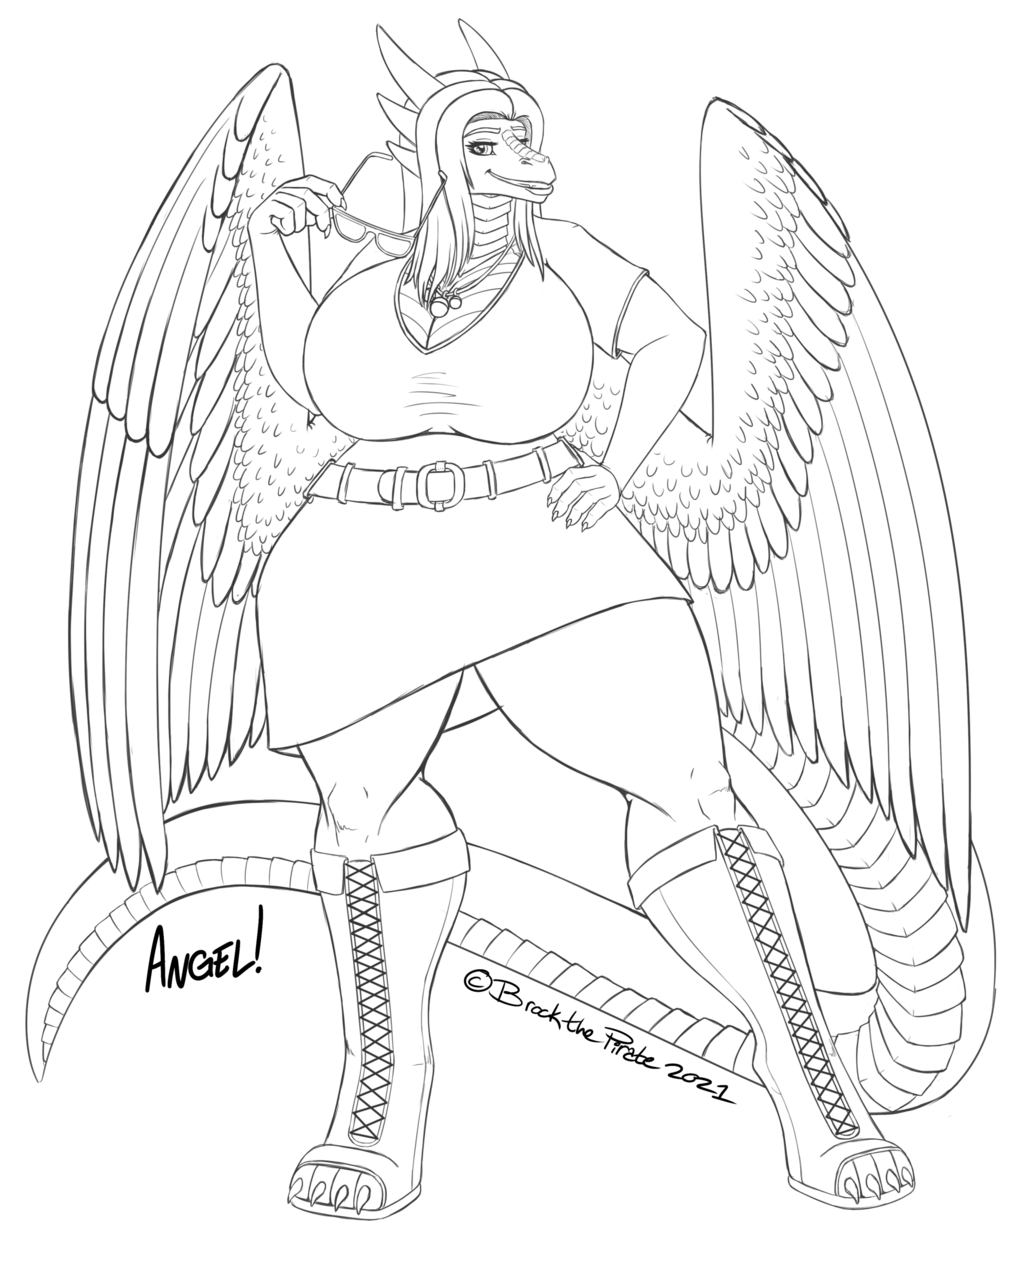 Angelic Vibes - Polished Sketch Example